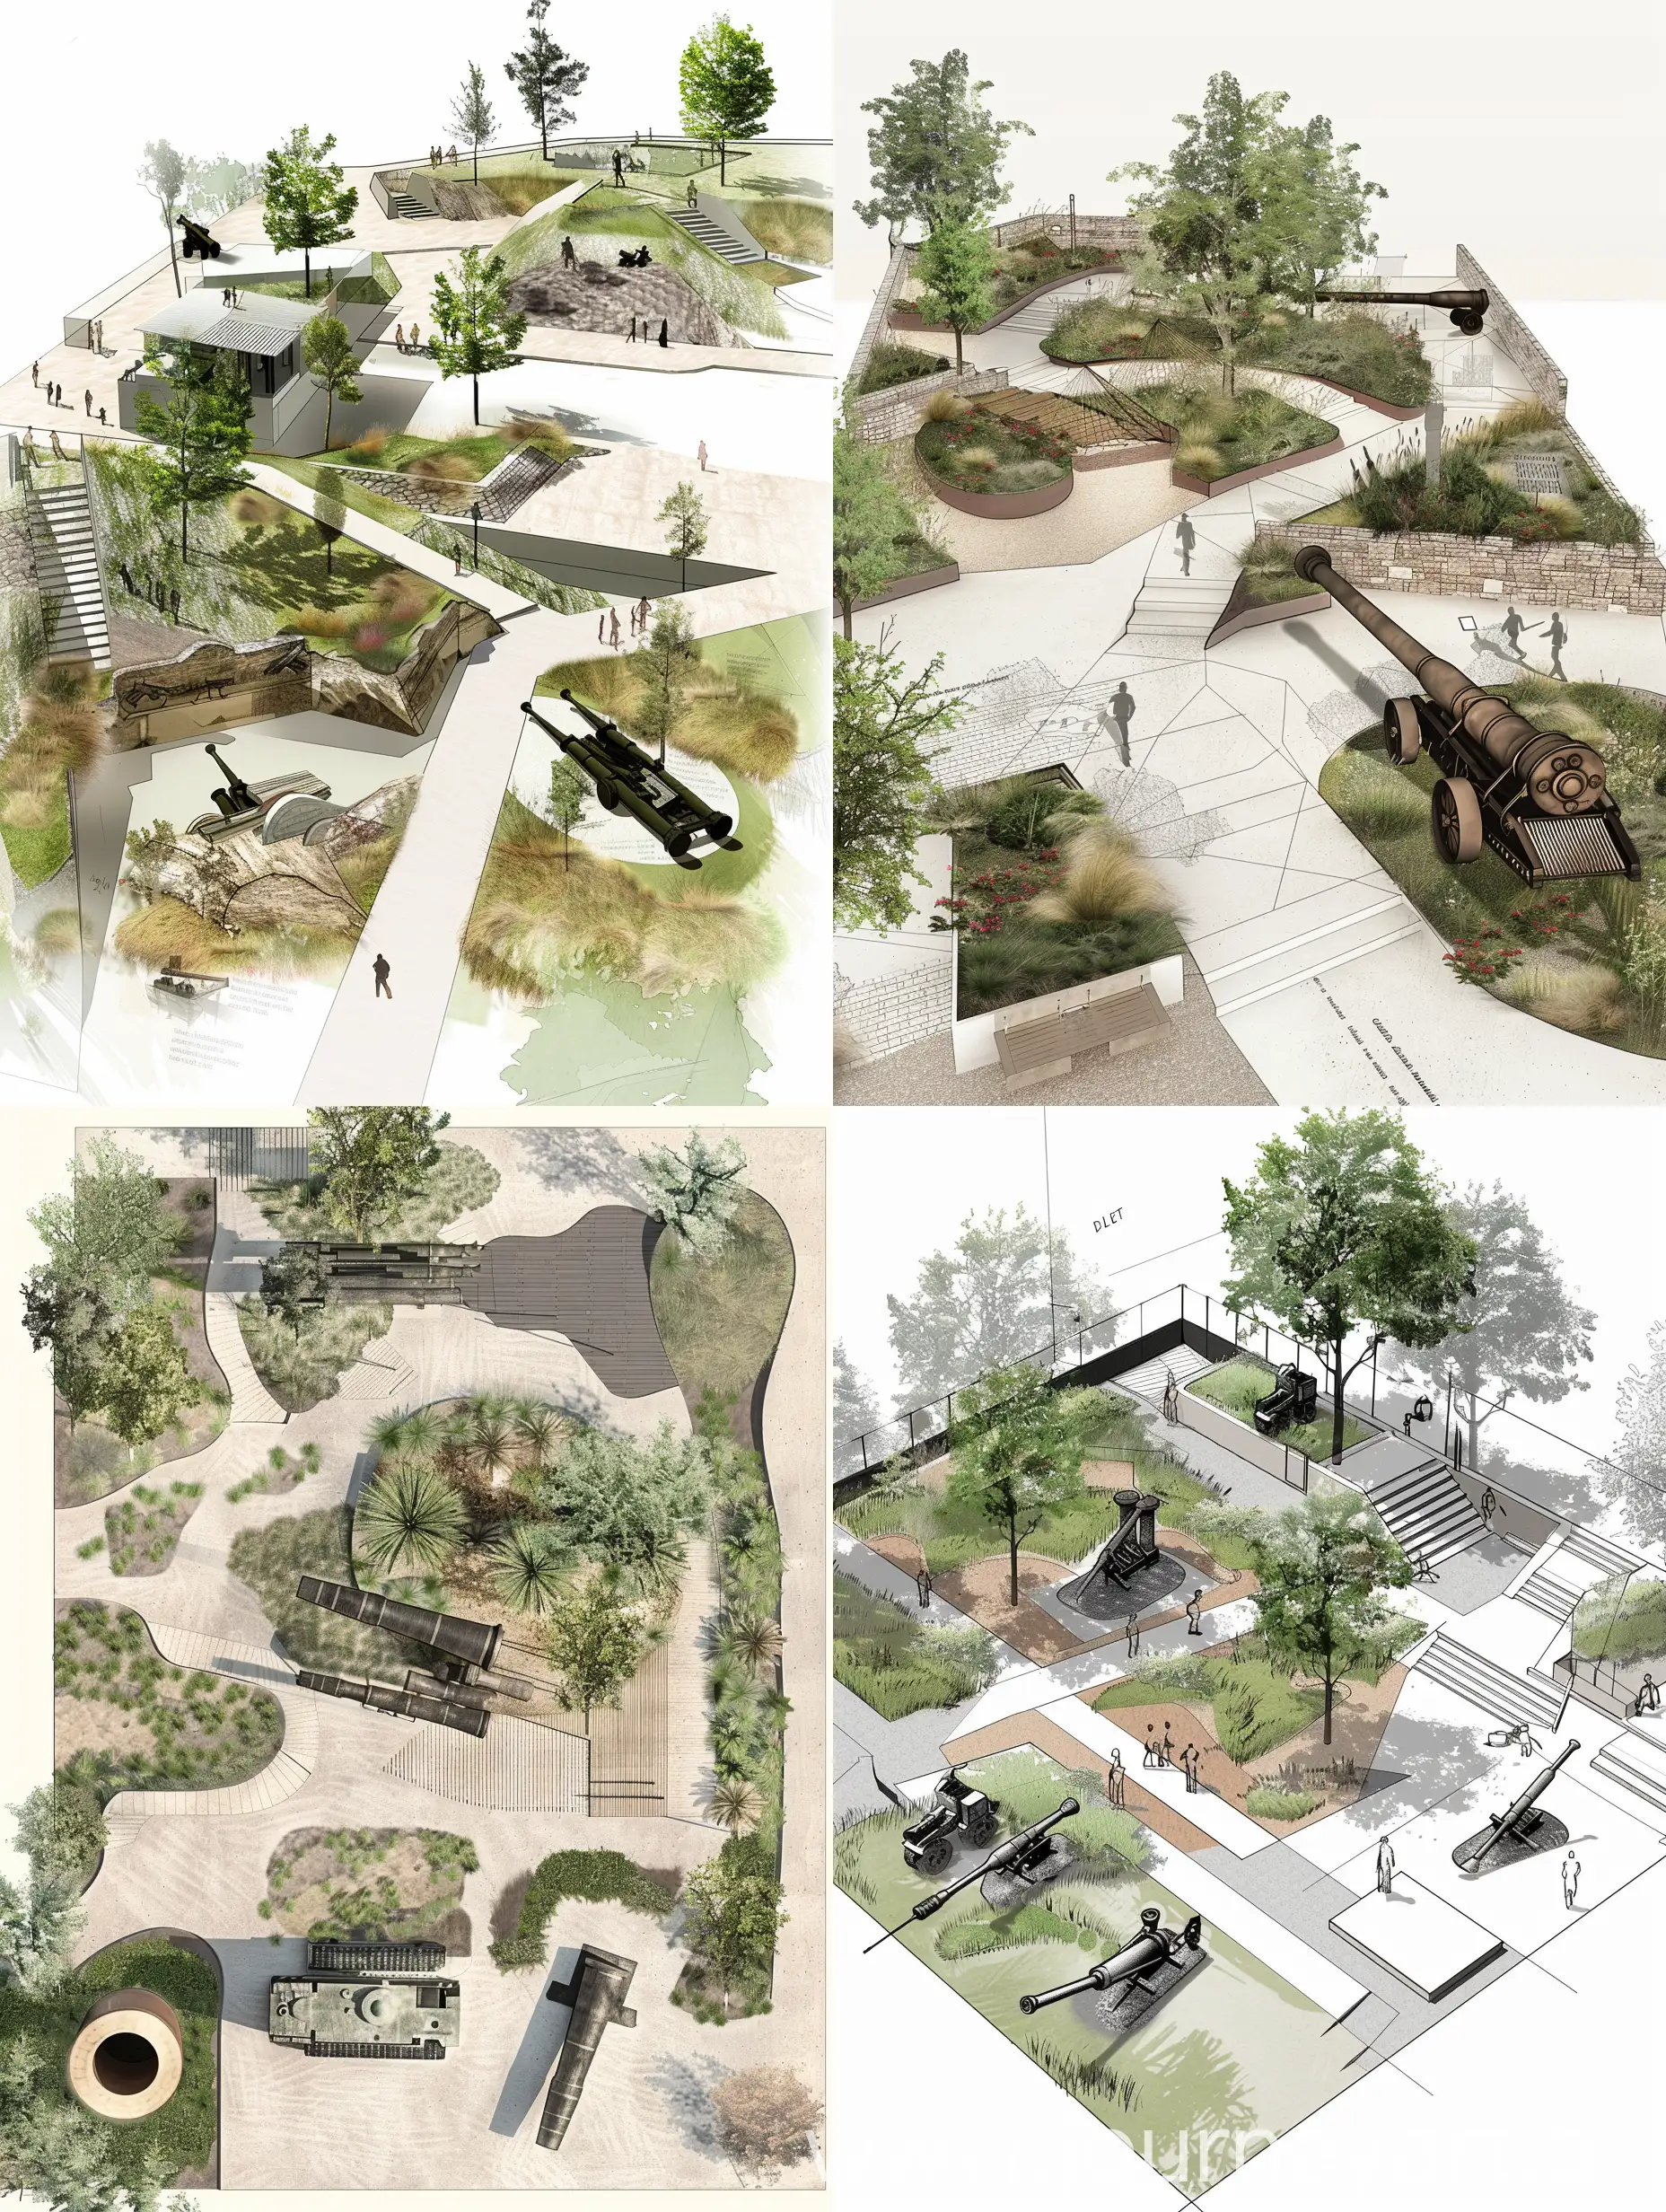 create a design for artillery museum outdoor exhibit with landscape and built spaces